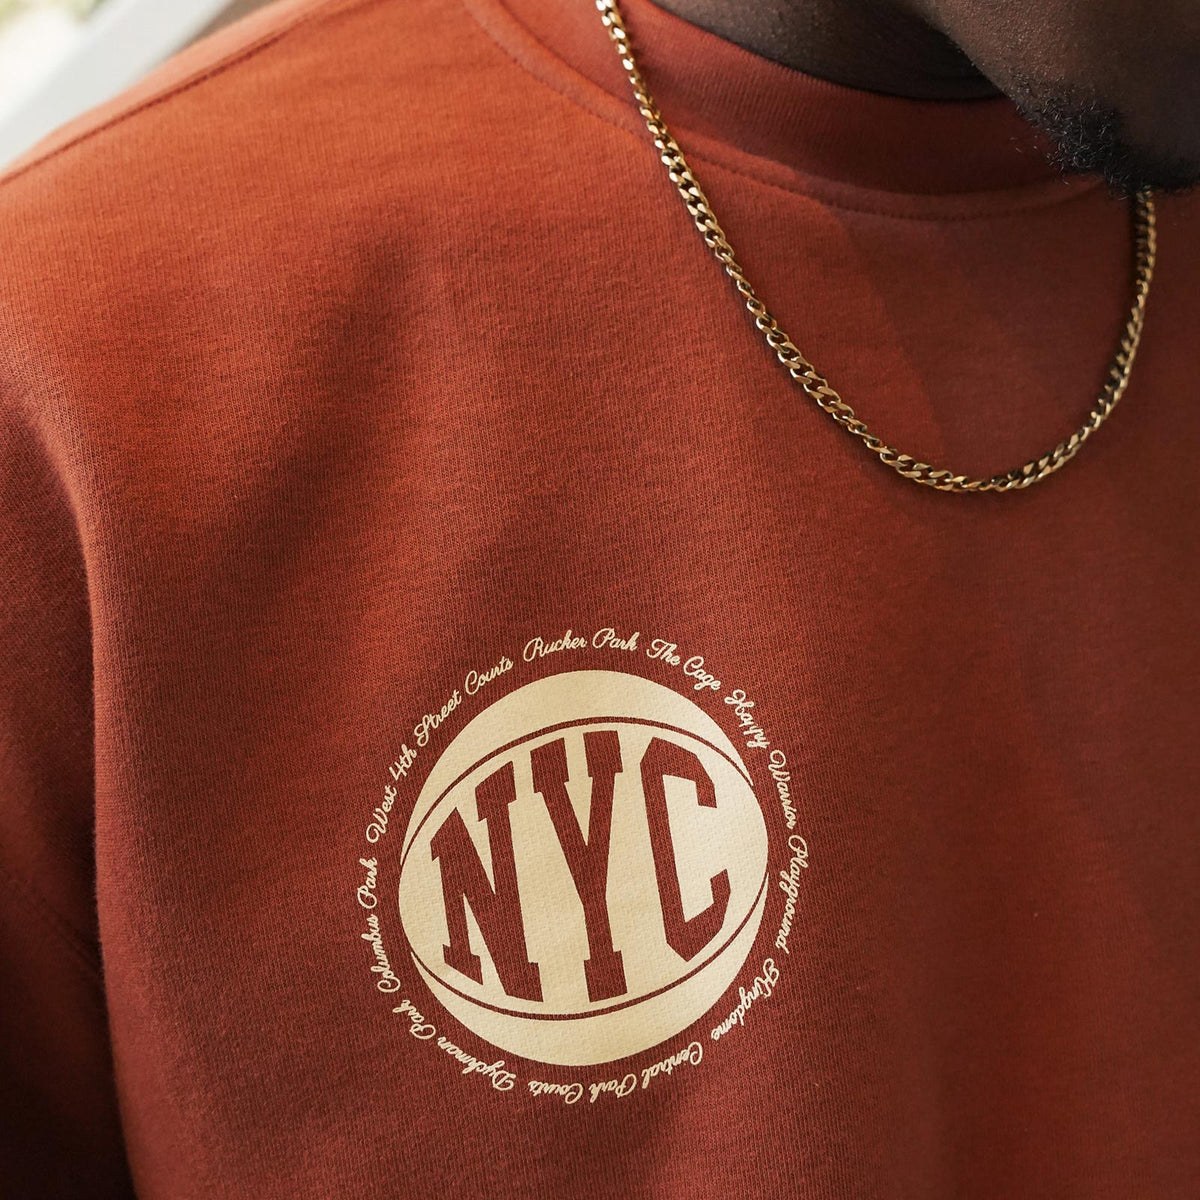 Icon Courts NYC Tee - Fall